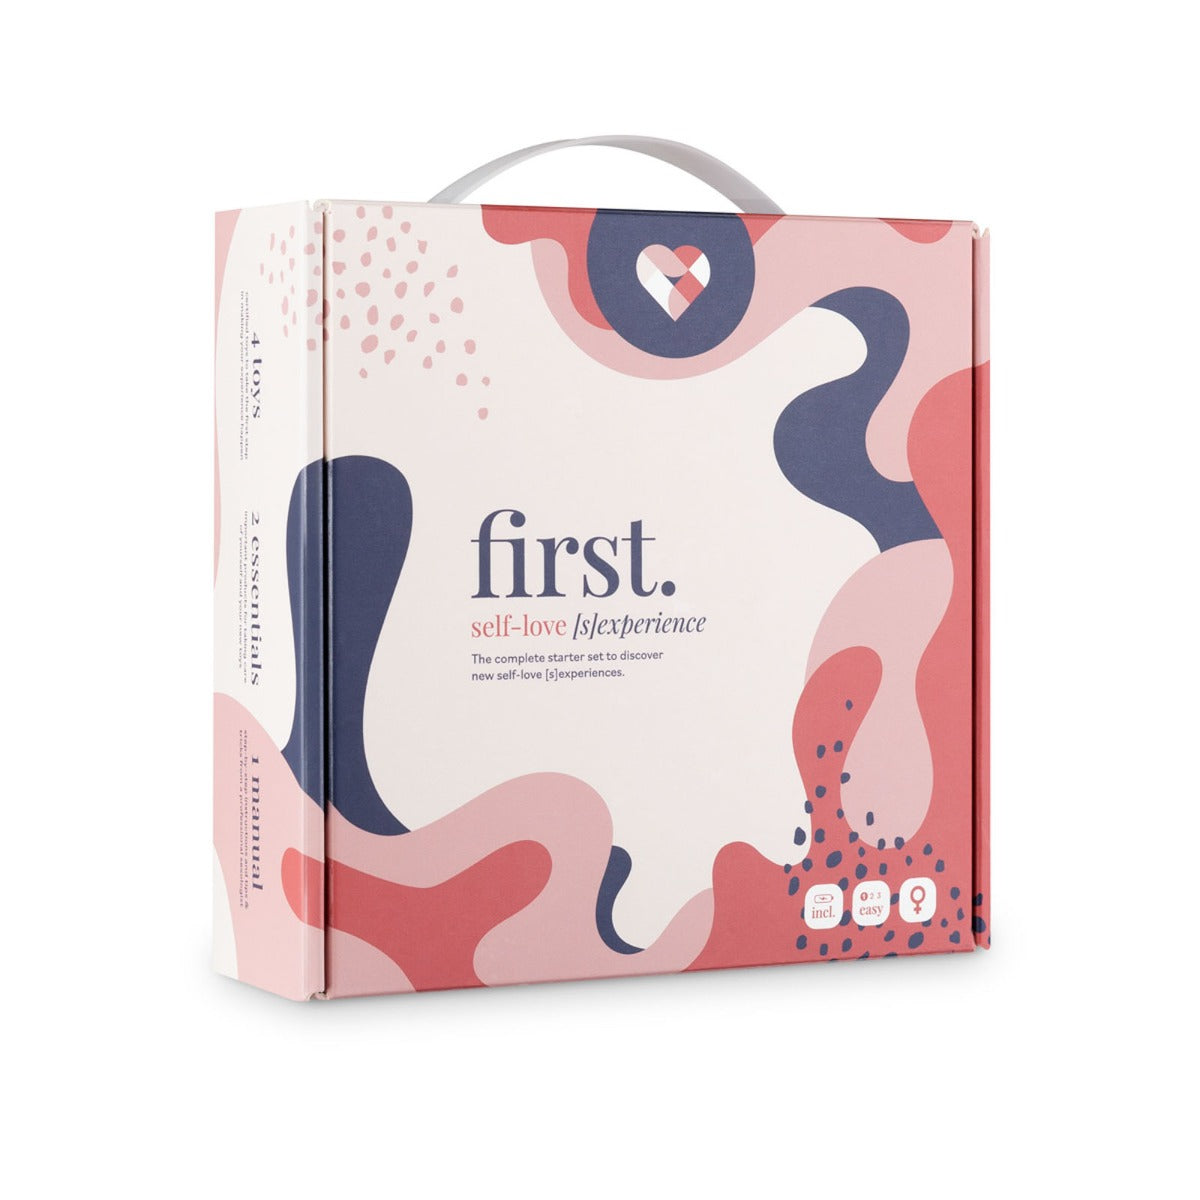 Loveboxxx First |Self-Love [S]Experience Starter Sex Toy Set